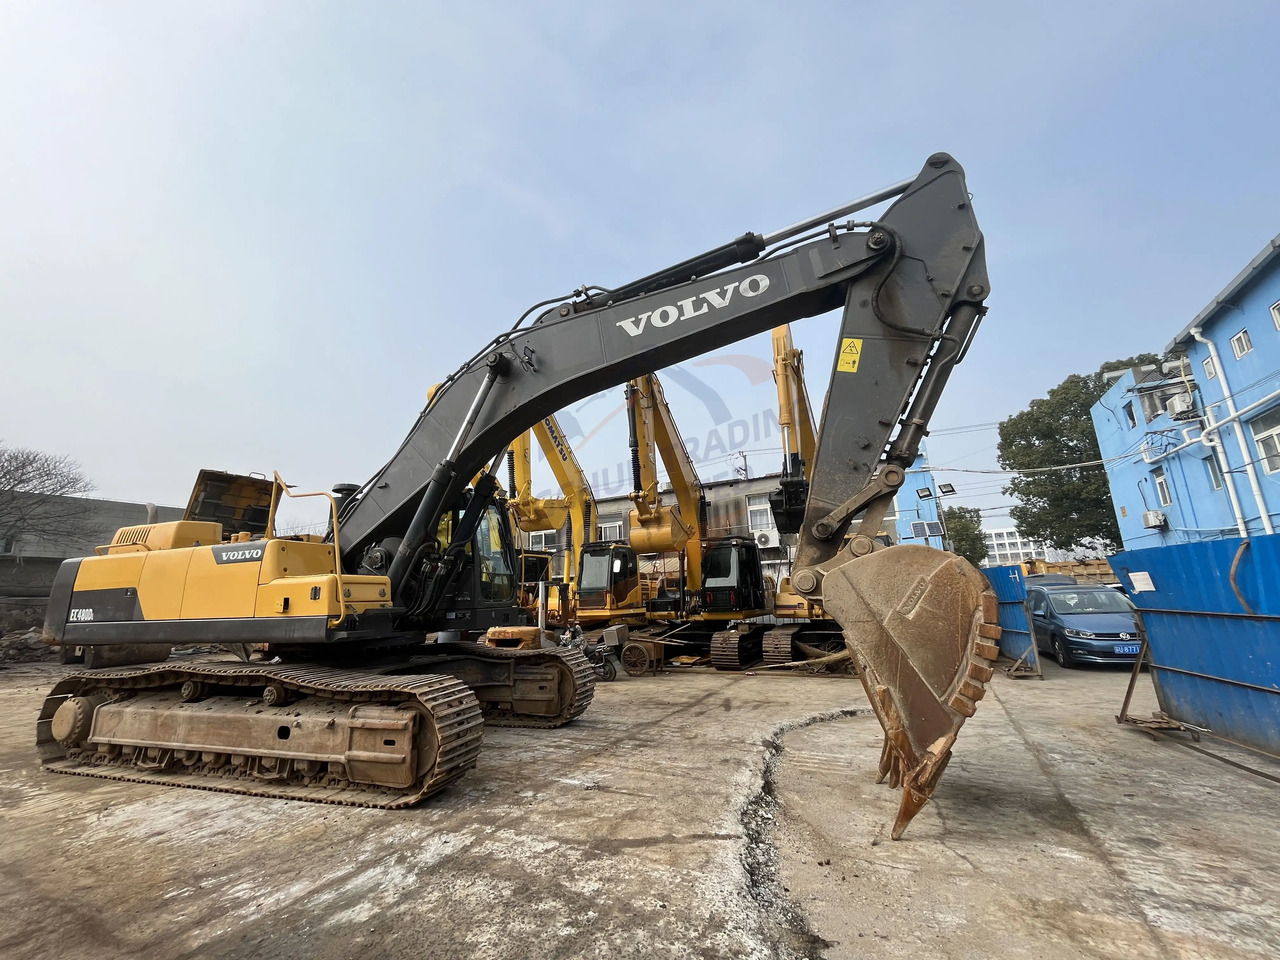 Ekskavator perayap New arrival second hand  hot selling Excavator construction machinery parts used excavator used  Volvo EC480D  in stock for sale: gambar 6